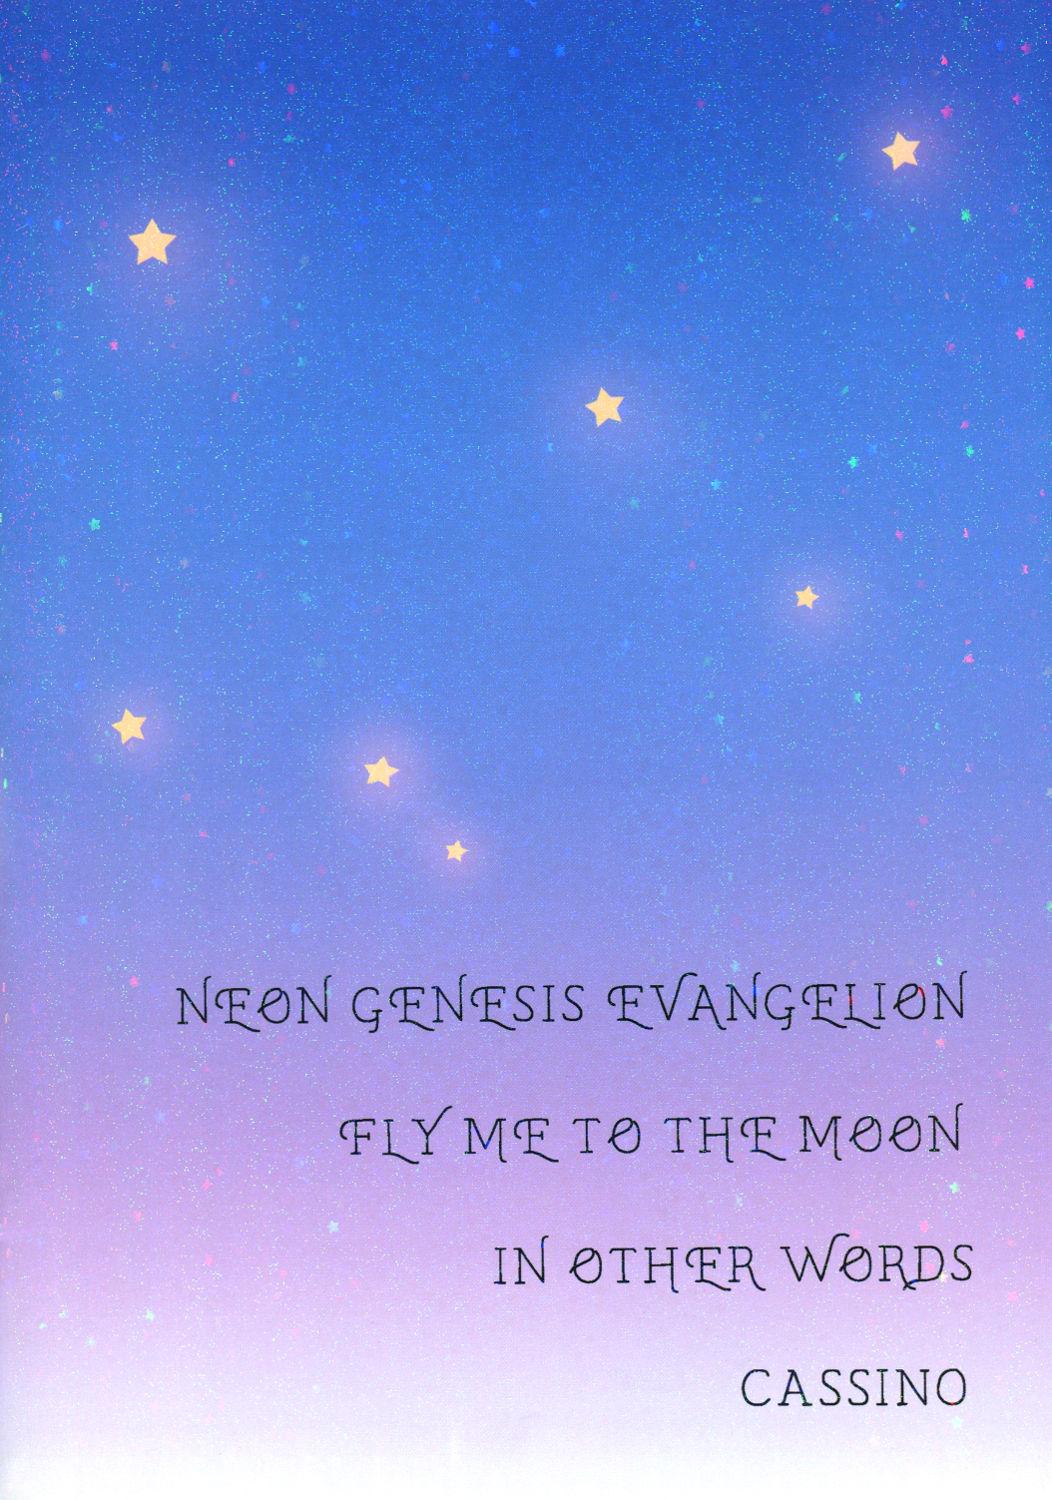 Messy FLY ME TO THE MOON - Neon genesis evangelion Romantic - Page 43